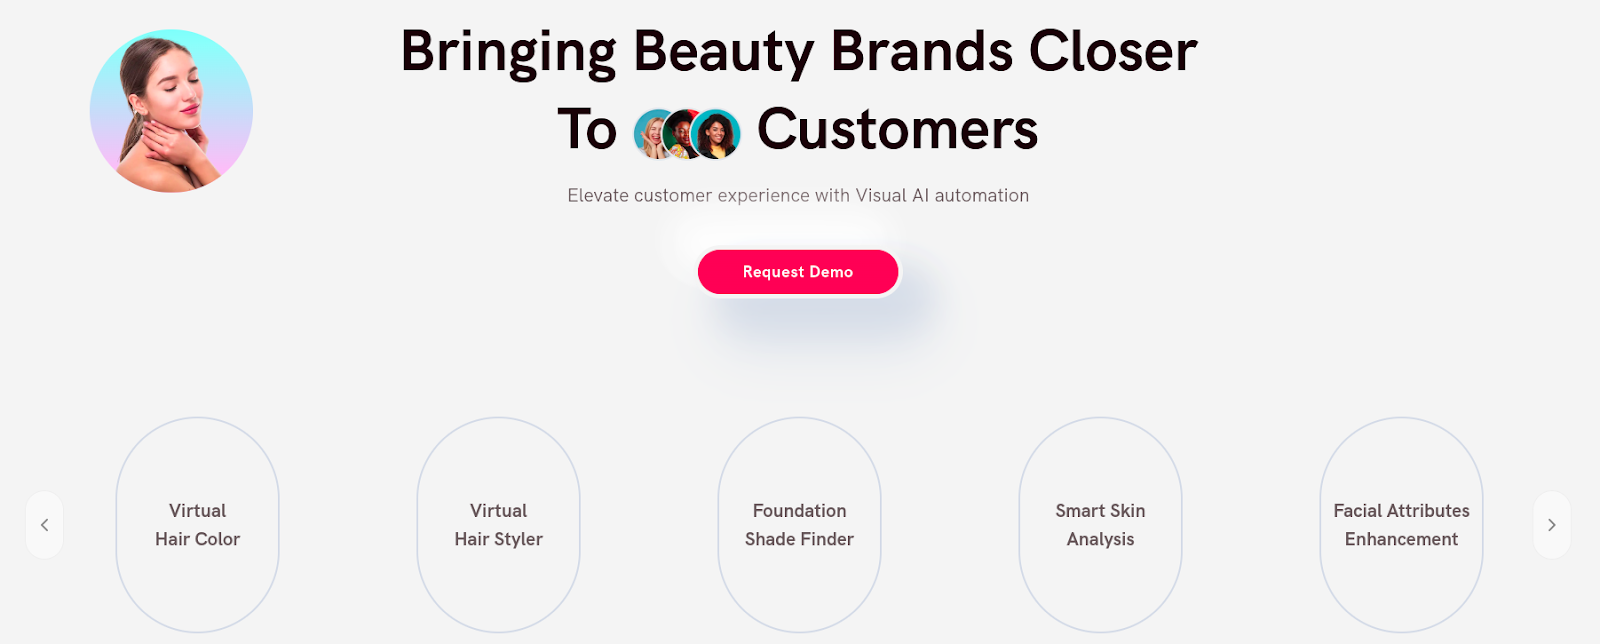 How to use Orbo AI? | Tech Solutions for Beauty Brands